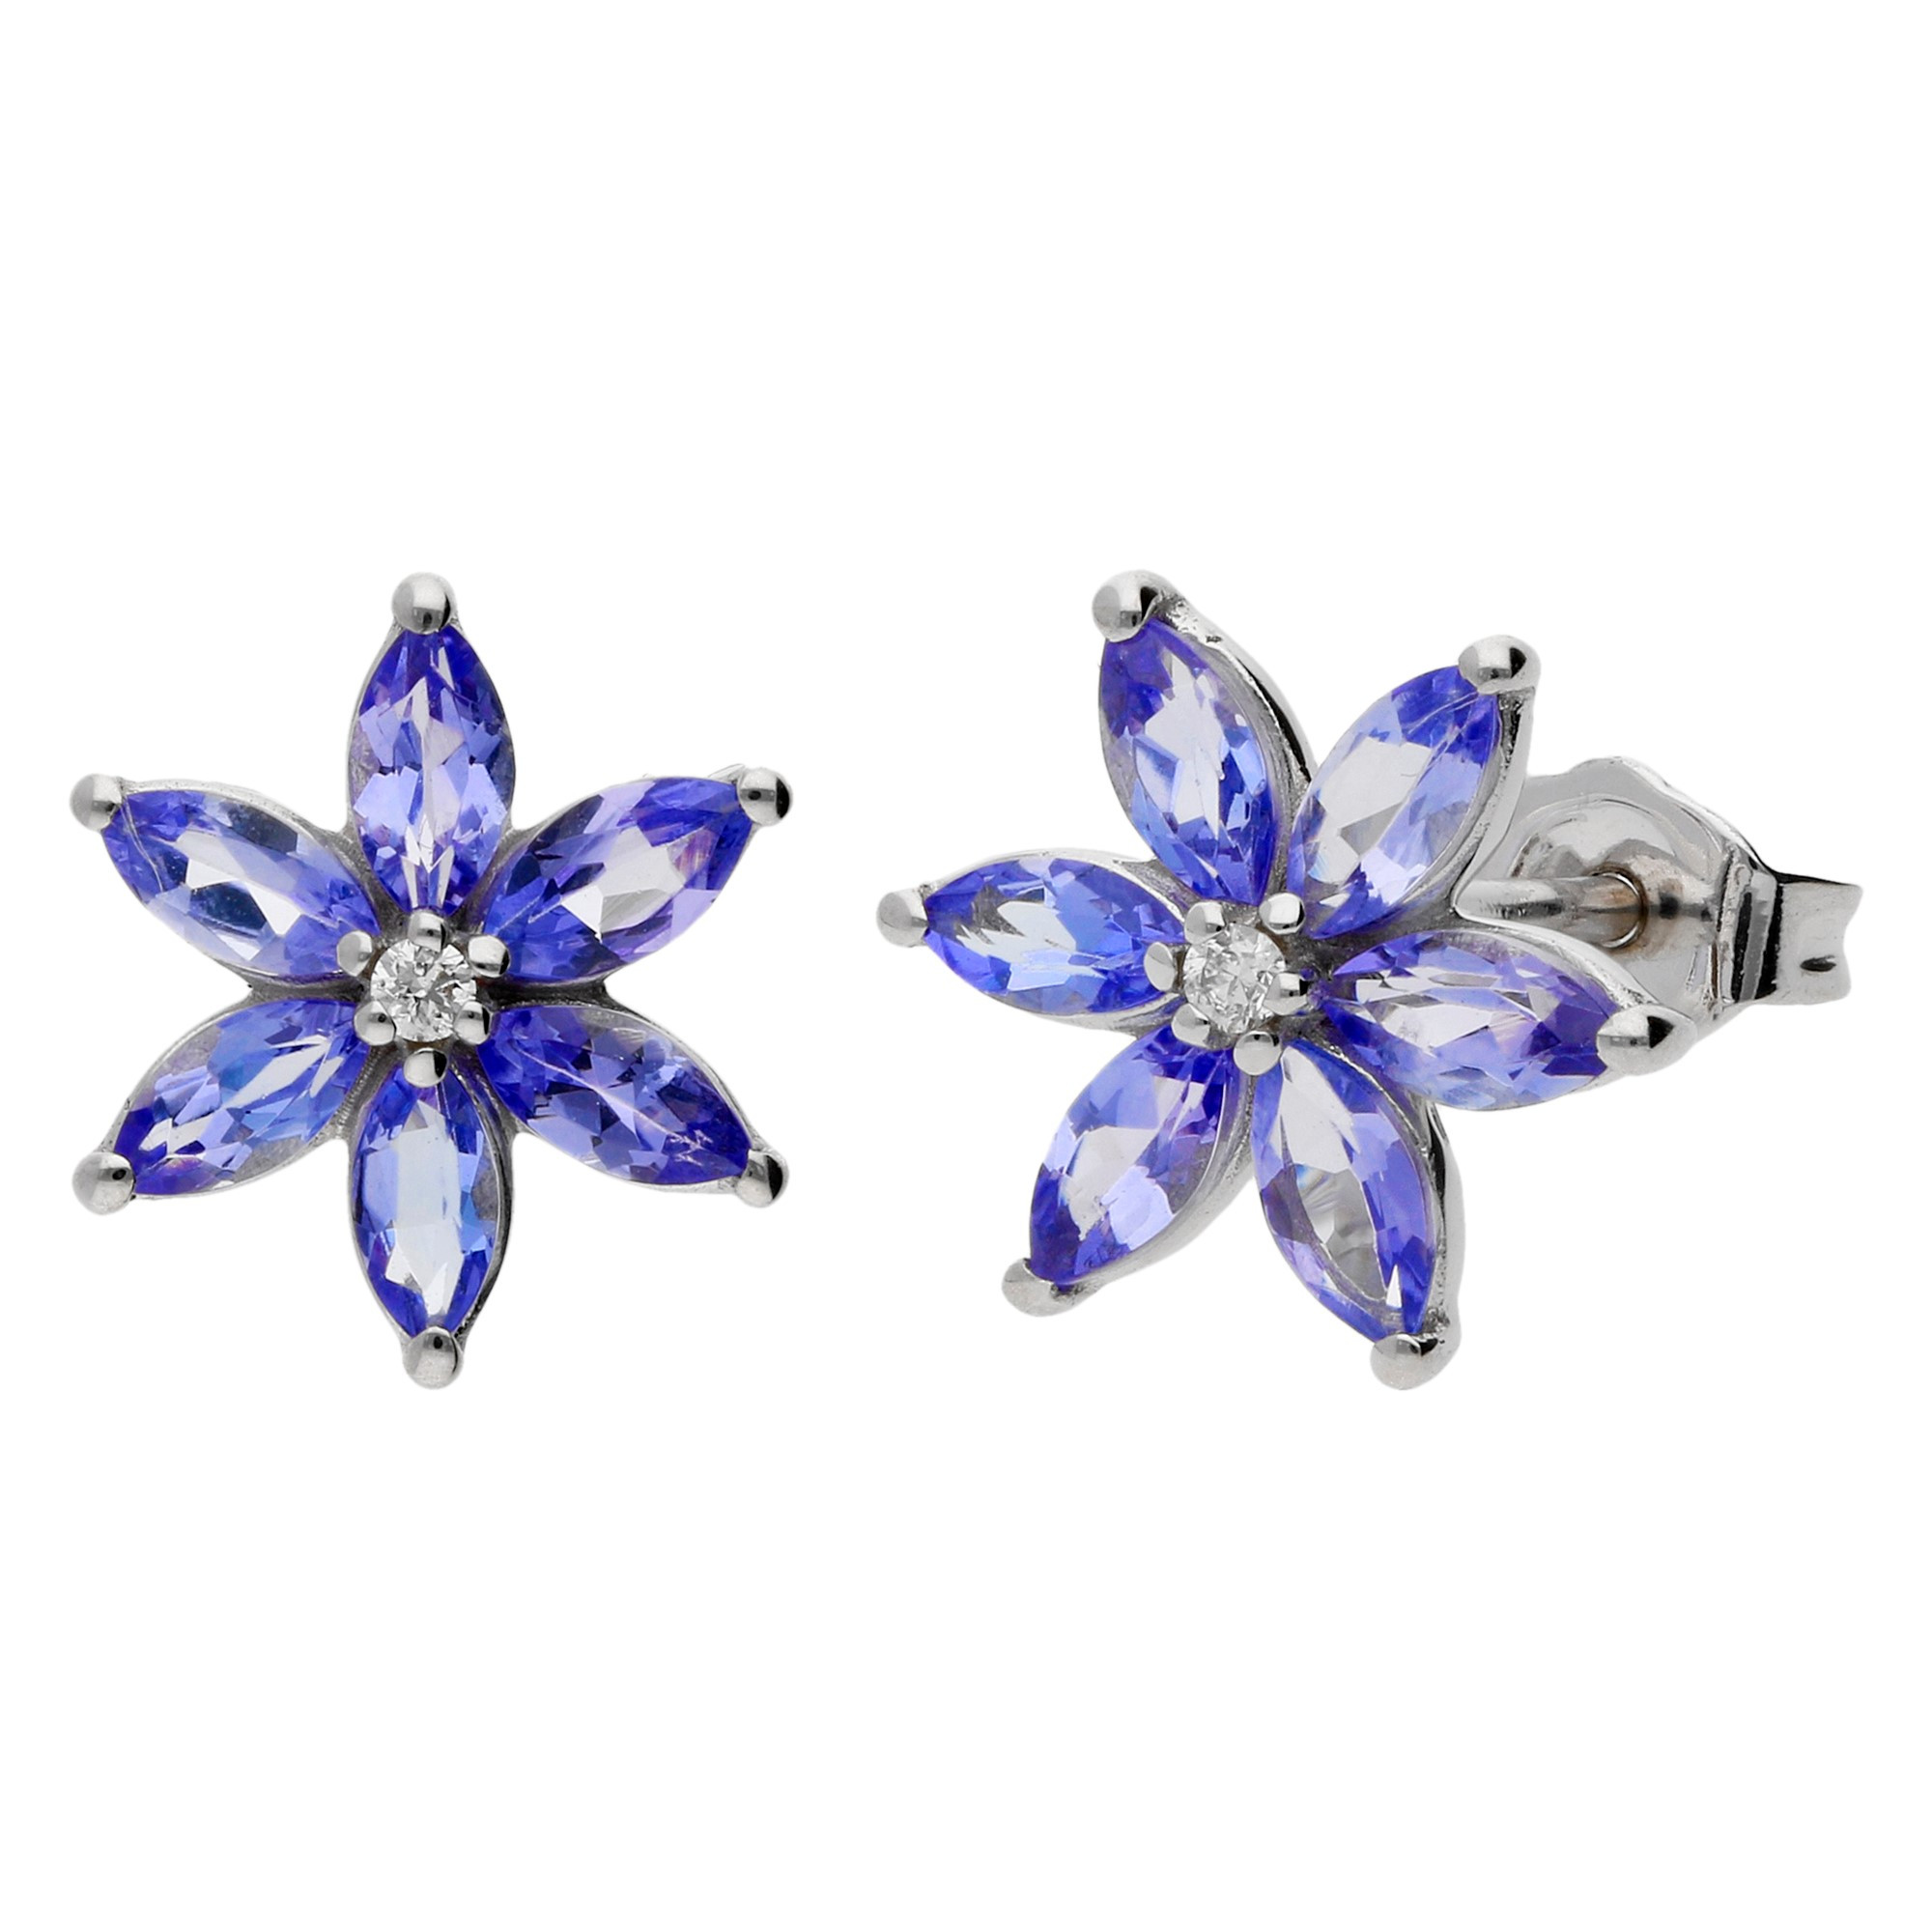 9ct White Gold Tanzanite & Diamond Floral Cluster Earrings | Buy Online ...